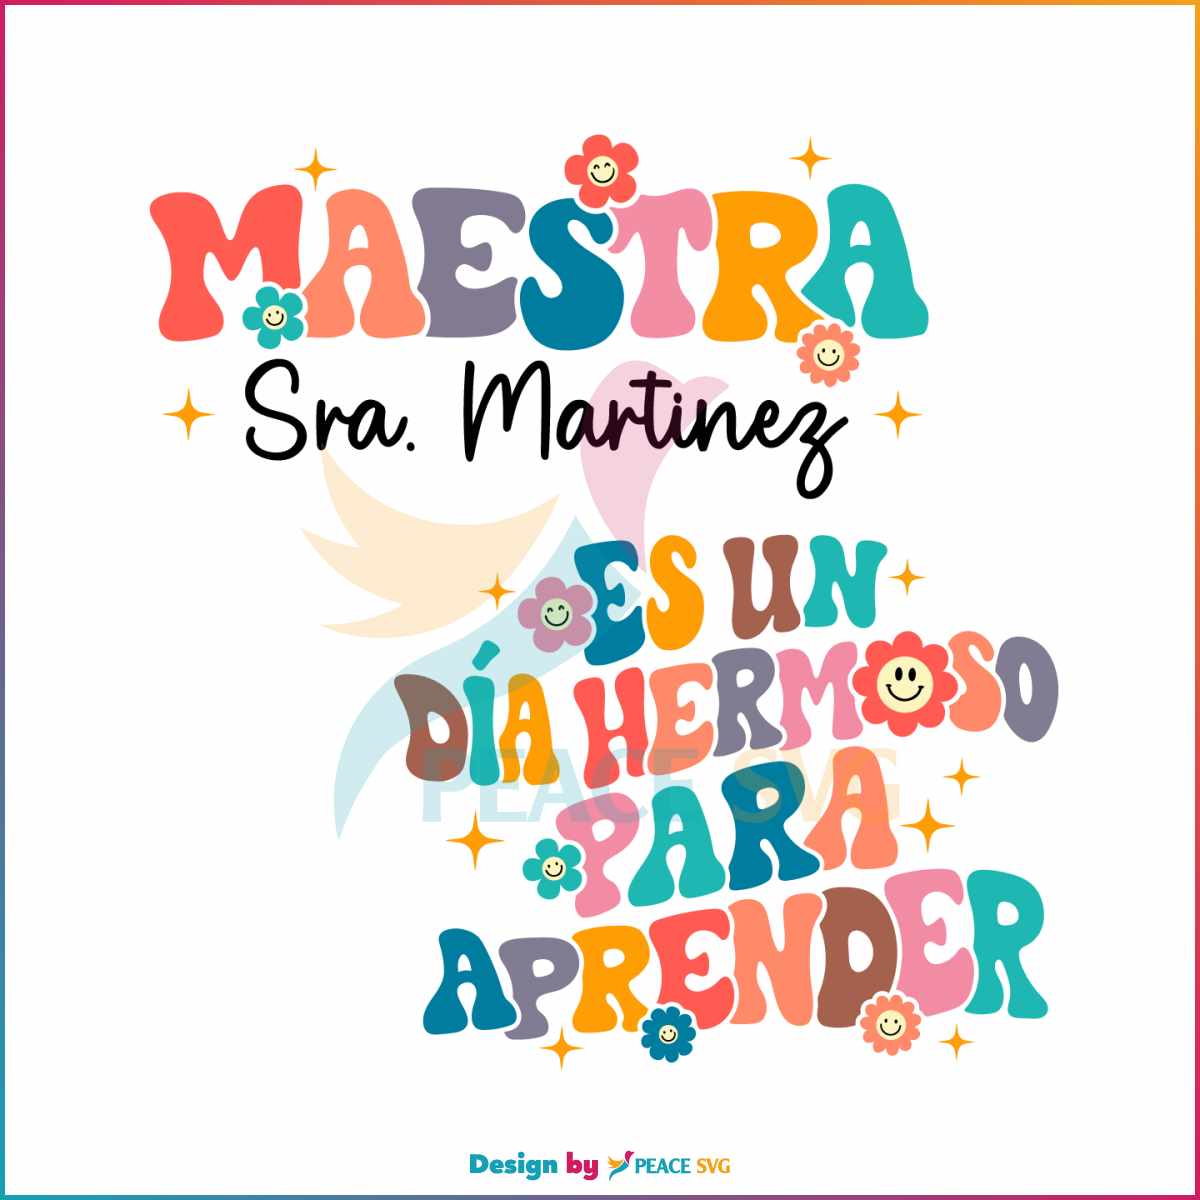 Personalized Maestra It's A Beautiful Day For Learning SVG » PeaceSVG